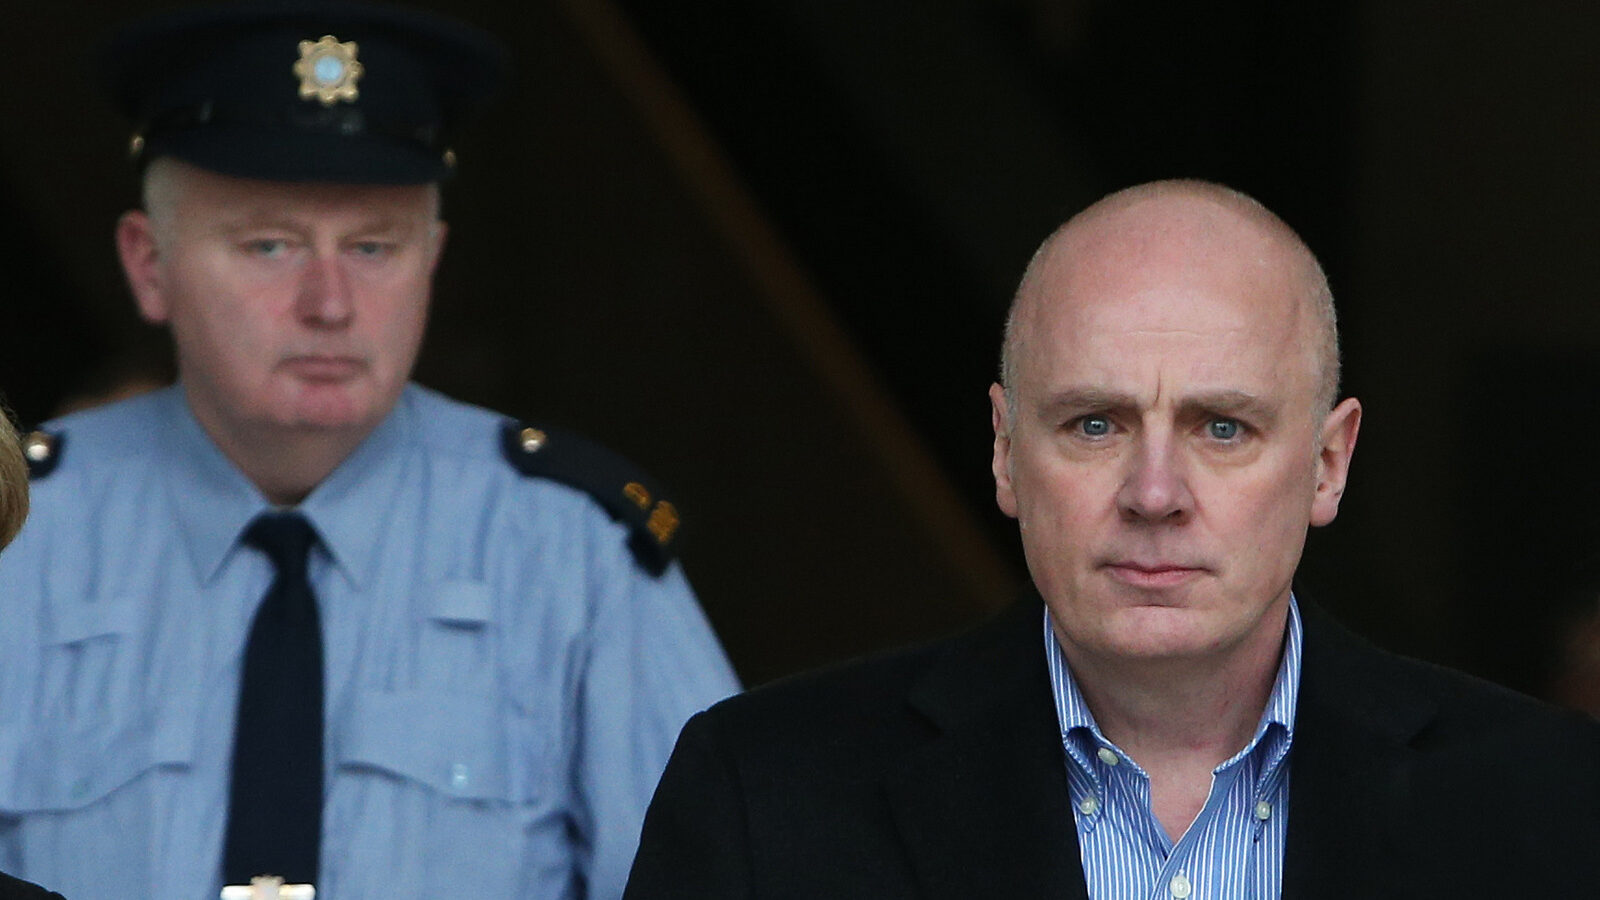 Former Anglo Irish Bank chief executive David Drumm walks free from Central Criminal Court in Dublin, Ireland Tuesday March 15, 2016, after he and relatives lodged 150,000 euros for his bail on 33 fraud charges. Drumm was extradited from Boston to Dublin on Monday after spending seven years in the United States seeking to gain U.S. bankruptcy protection and avoid facing 33 Irish fraud charges connected to Anglo’s 2009 nationalization and collapse. Court officials expect his trial to begin in mid-2017. (Brian Lawless/PA via AP) UNITED KINGDOM OUT NO SALES NO ARCHIVE